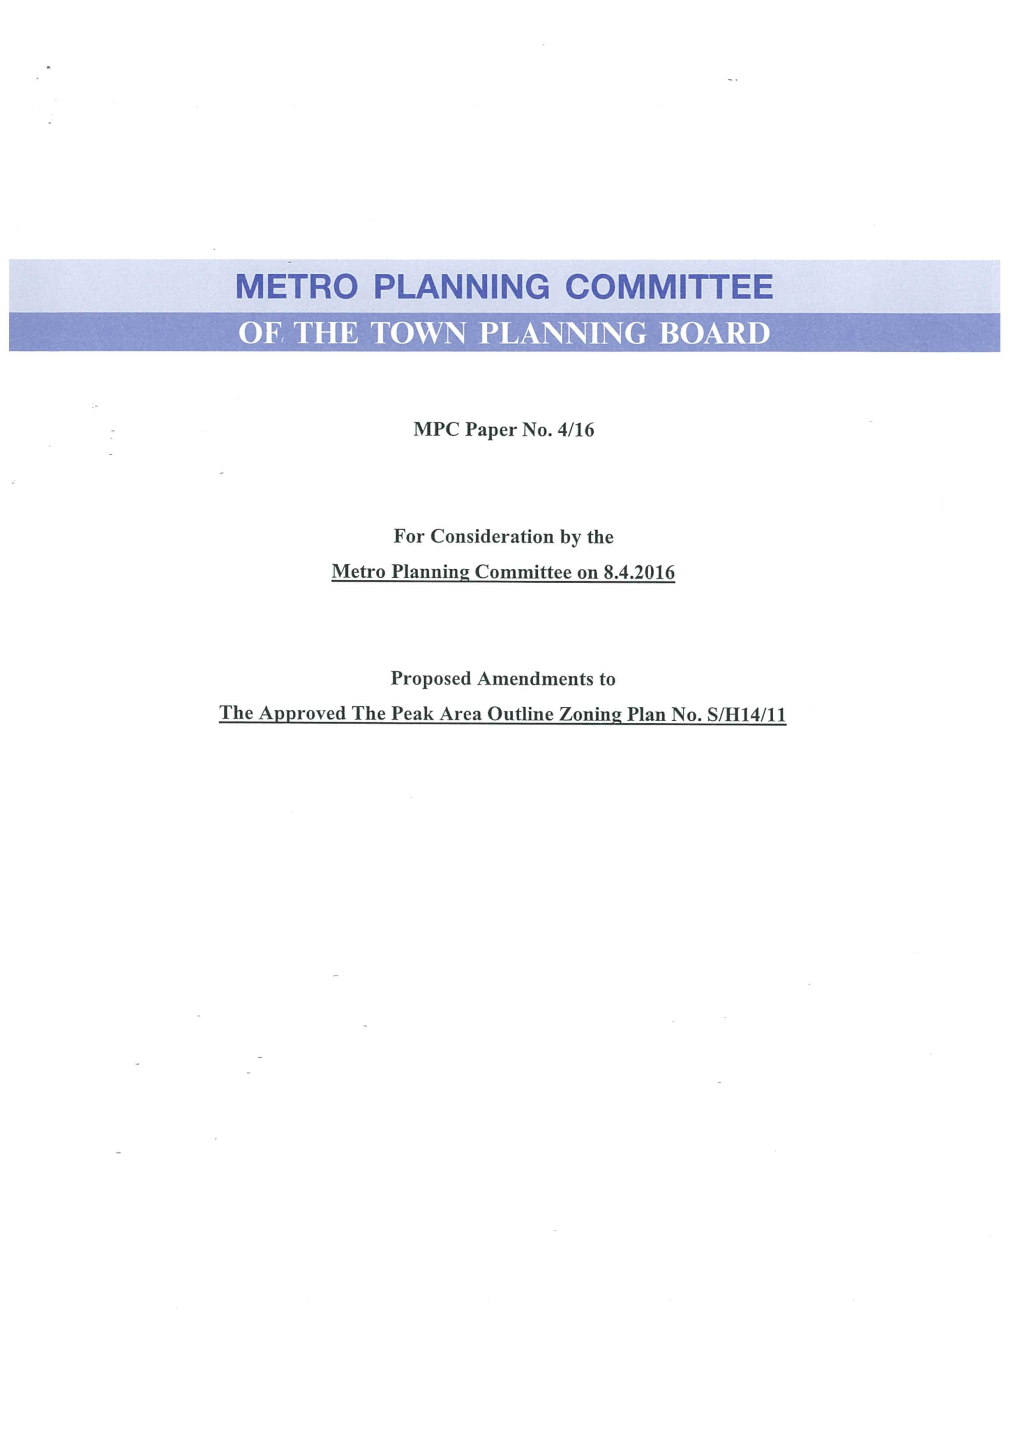 MPC Paper No. 4/16 for Consideration by the Metro Planning Committee on 8.4.2016